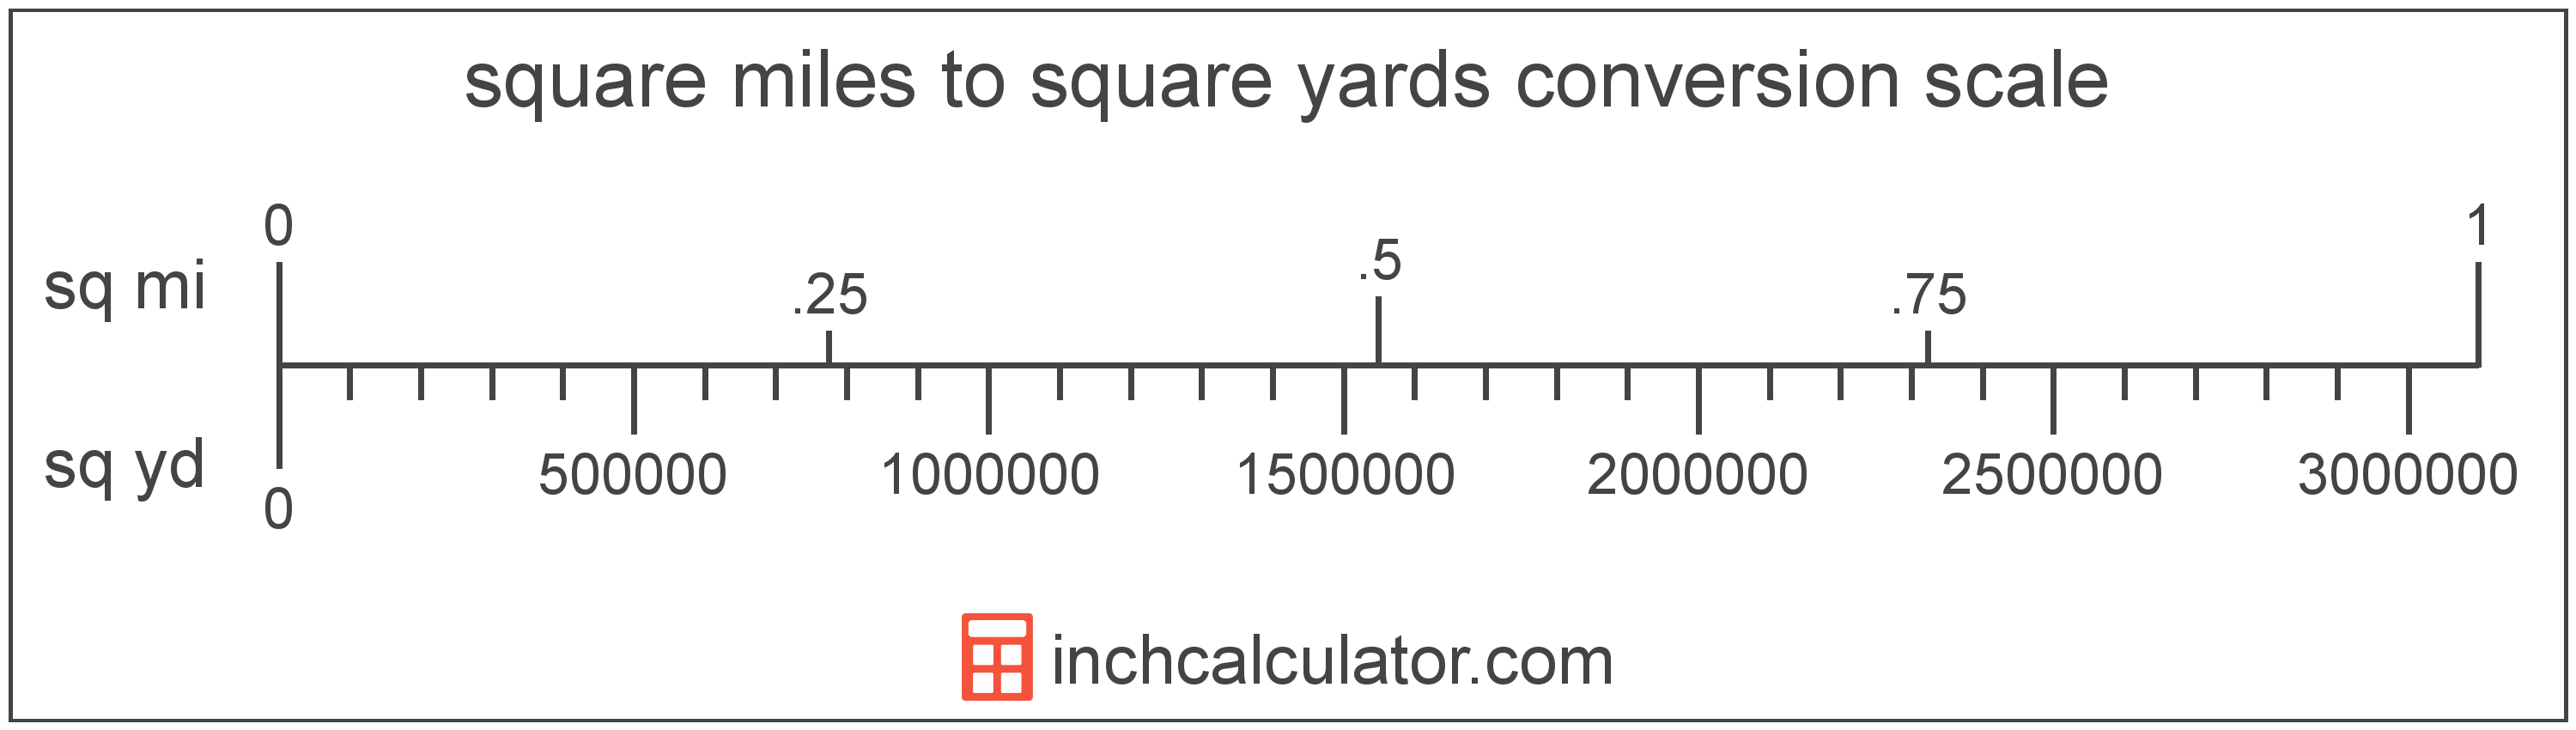 conversion scale showing square yards and equivalent square miles area values